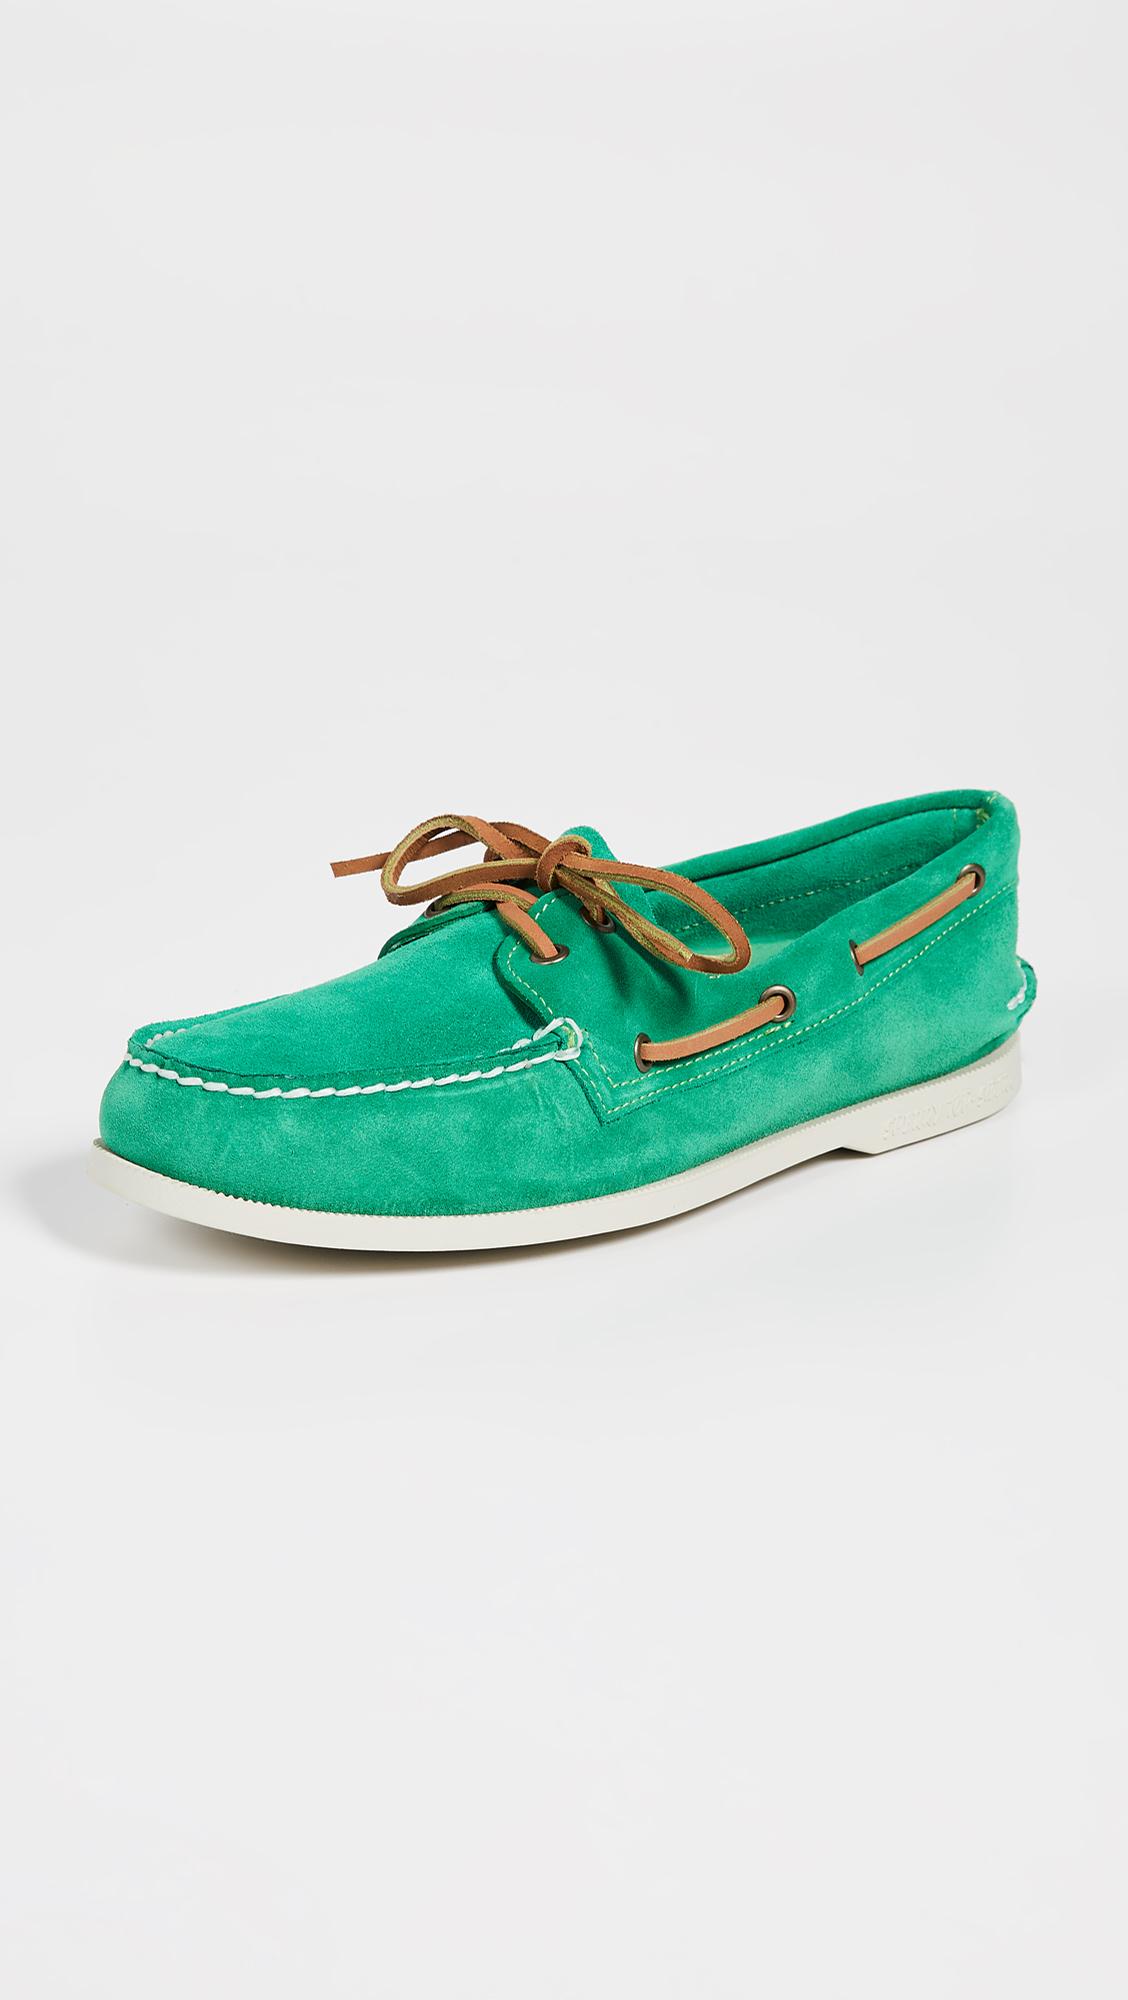 Sperry Top-Sider A/o 2 Eye Suede Shoes in Green for Men - Lyst